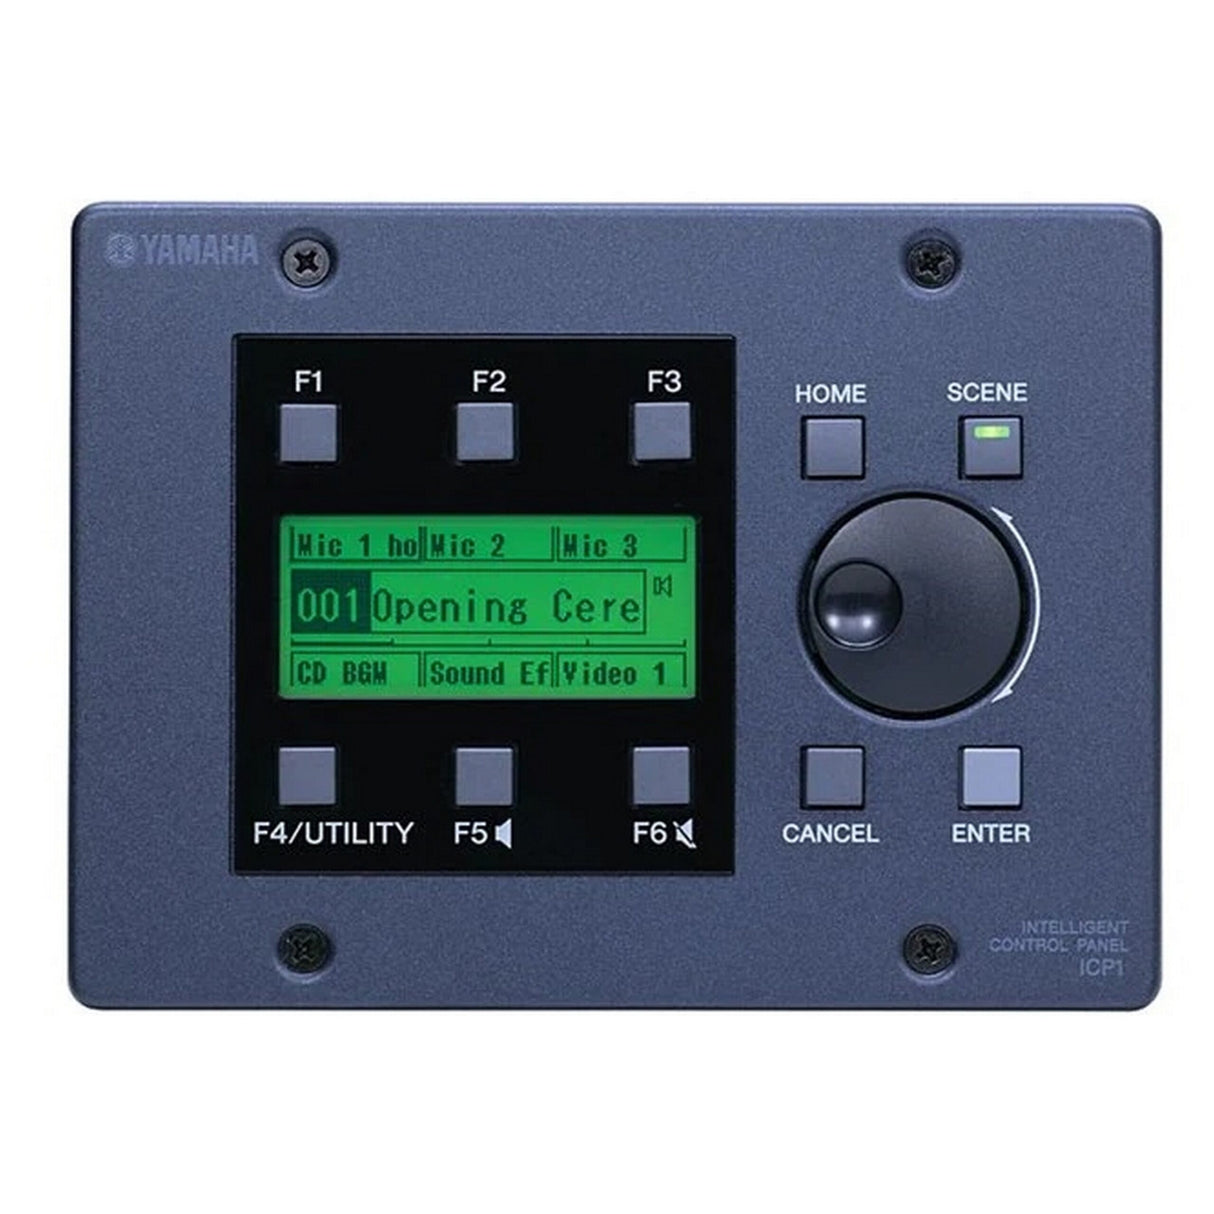 Yamaha ICP1 Intelligent Control Panel for DME-N and Satellite Series